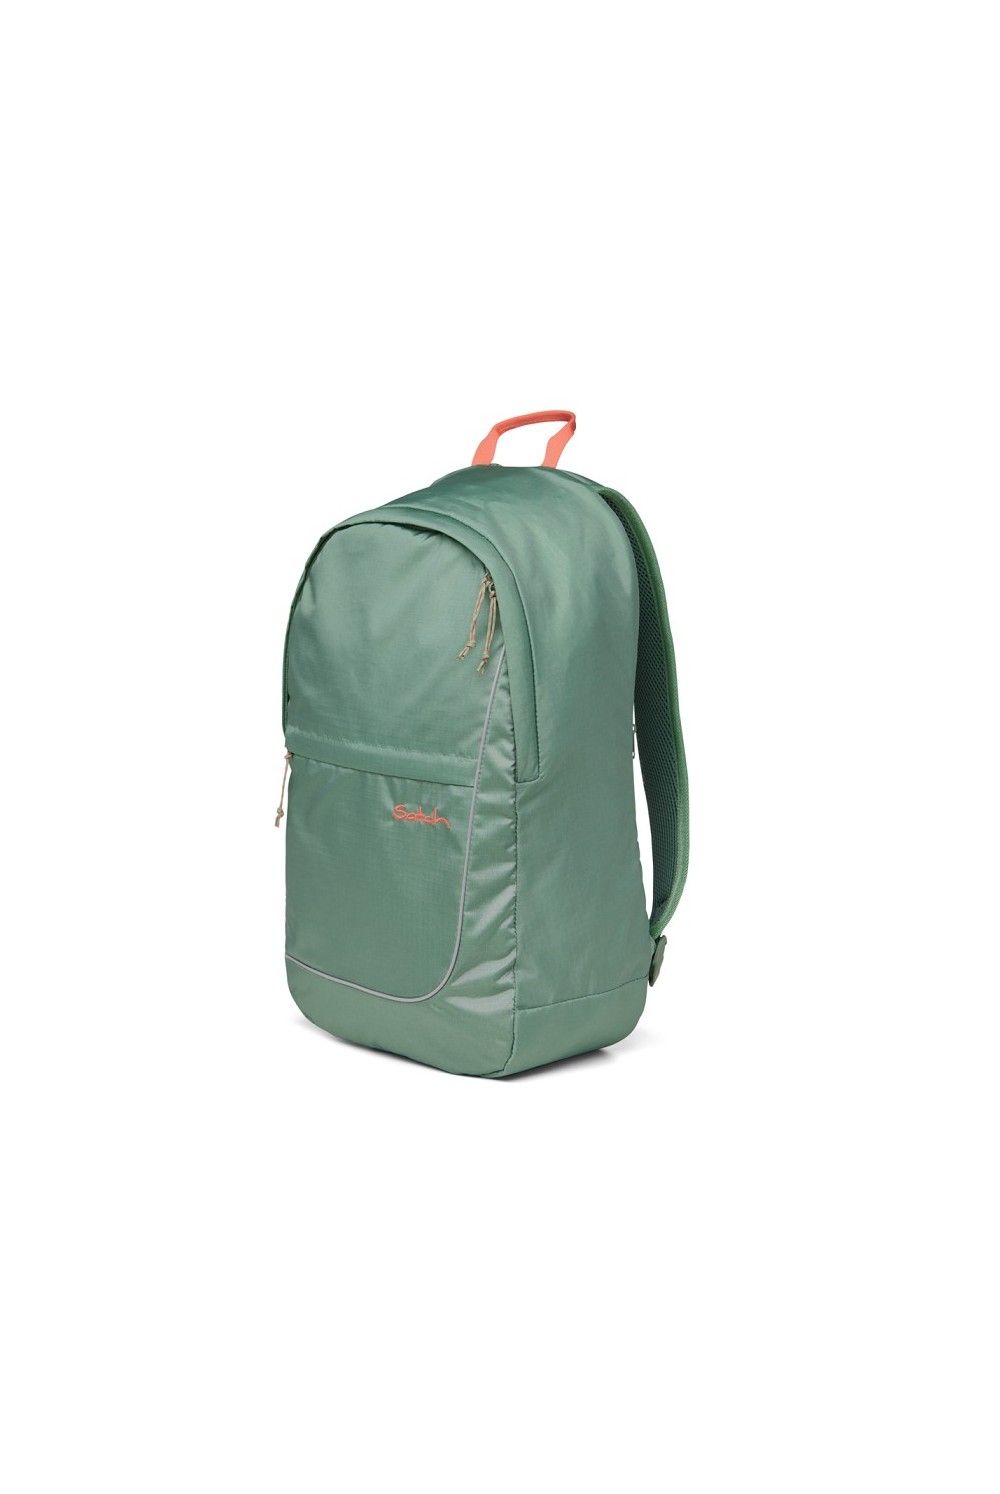 Satch Backpack Fly Ripstop Green